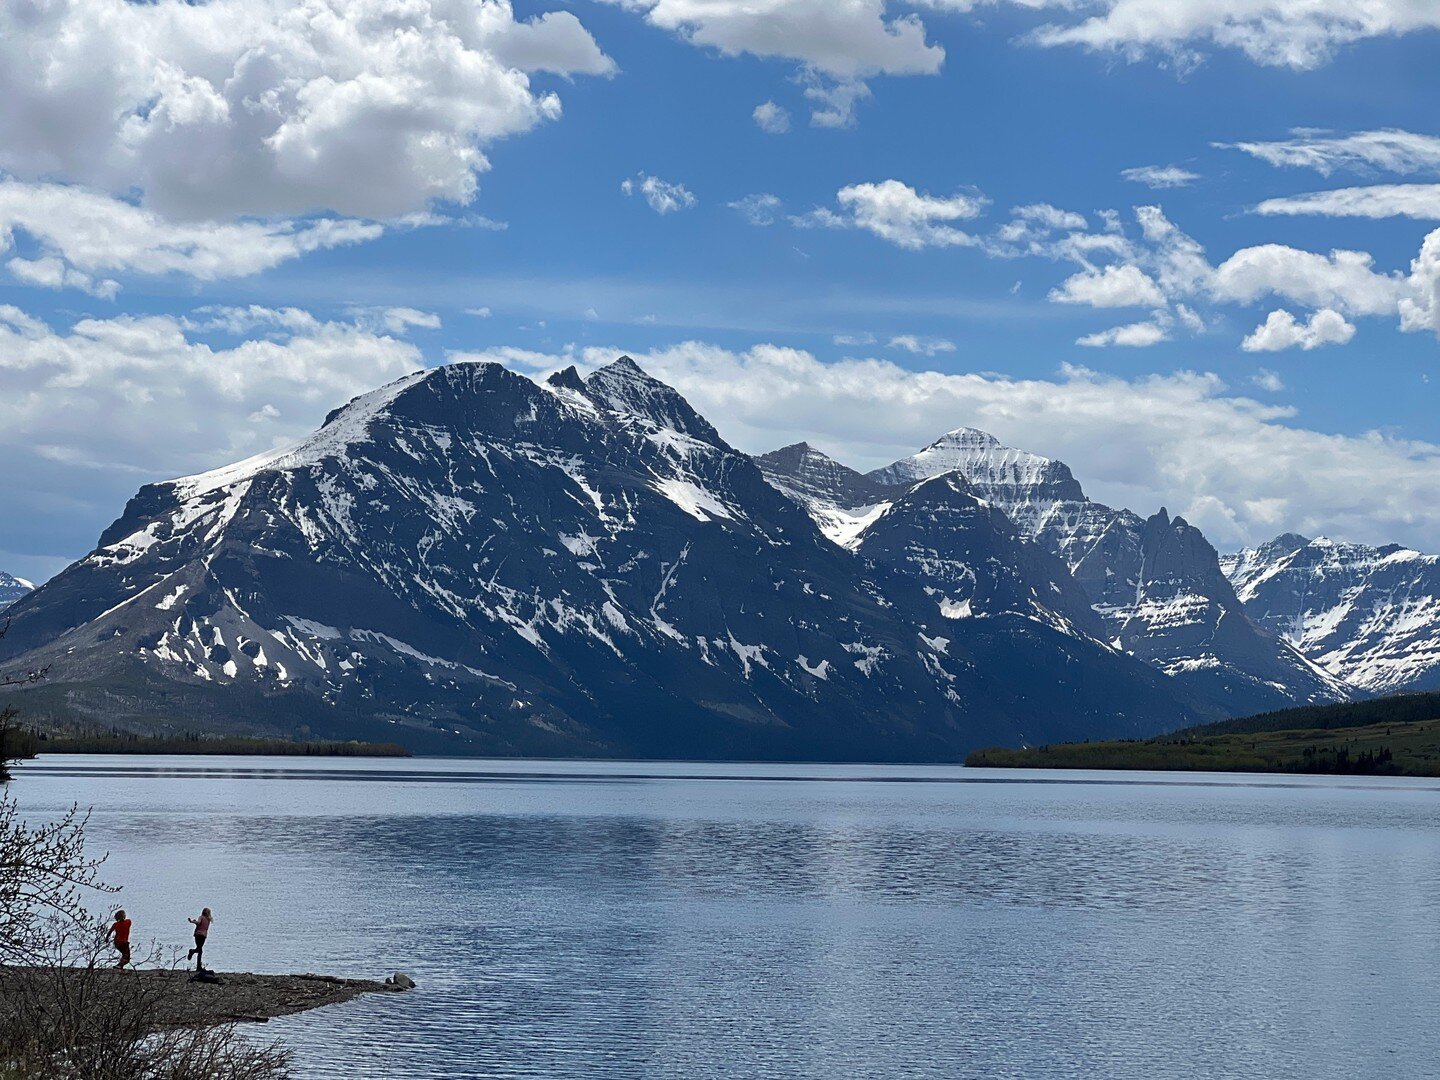 Welcoming Summer, last year and this.

2022, skipping rocks at St Marys Lake, Glacier NP

2023, basking in the sunshine near Wallowa Lake, Joseph, OR 

I guess we have a travel style!